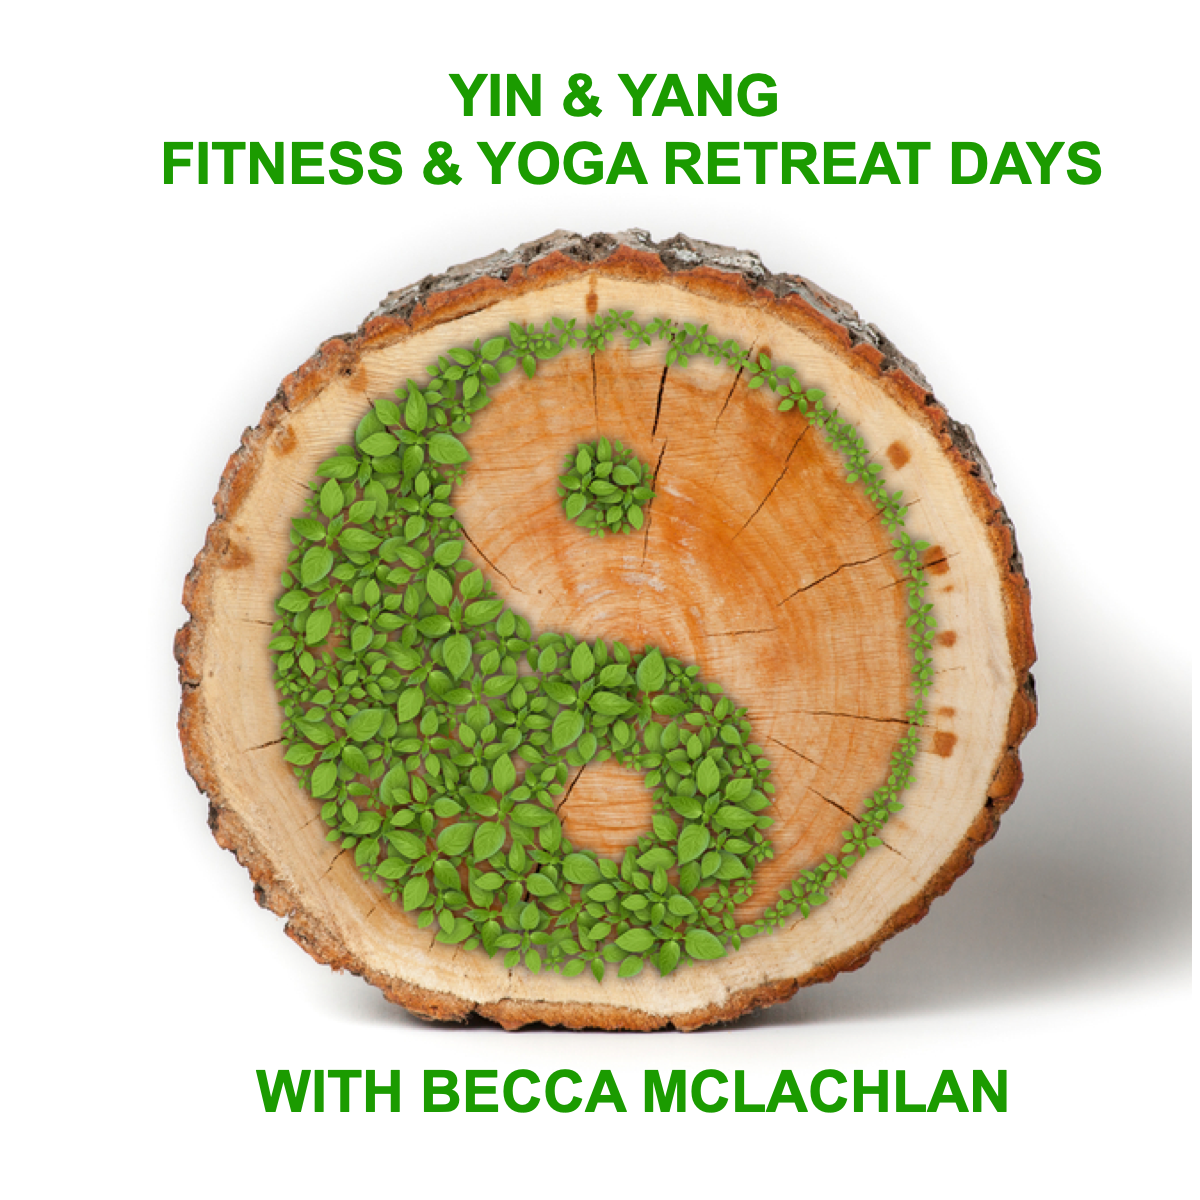 Yin & Yang Fitness & Yoga Small Group Retreat Day - (FULLY BOOKED - email becca@becca-mclachlan.com to be added to the cancellation list)